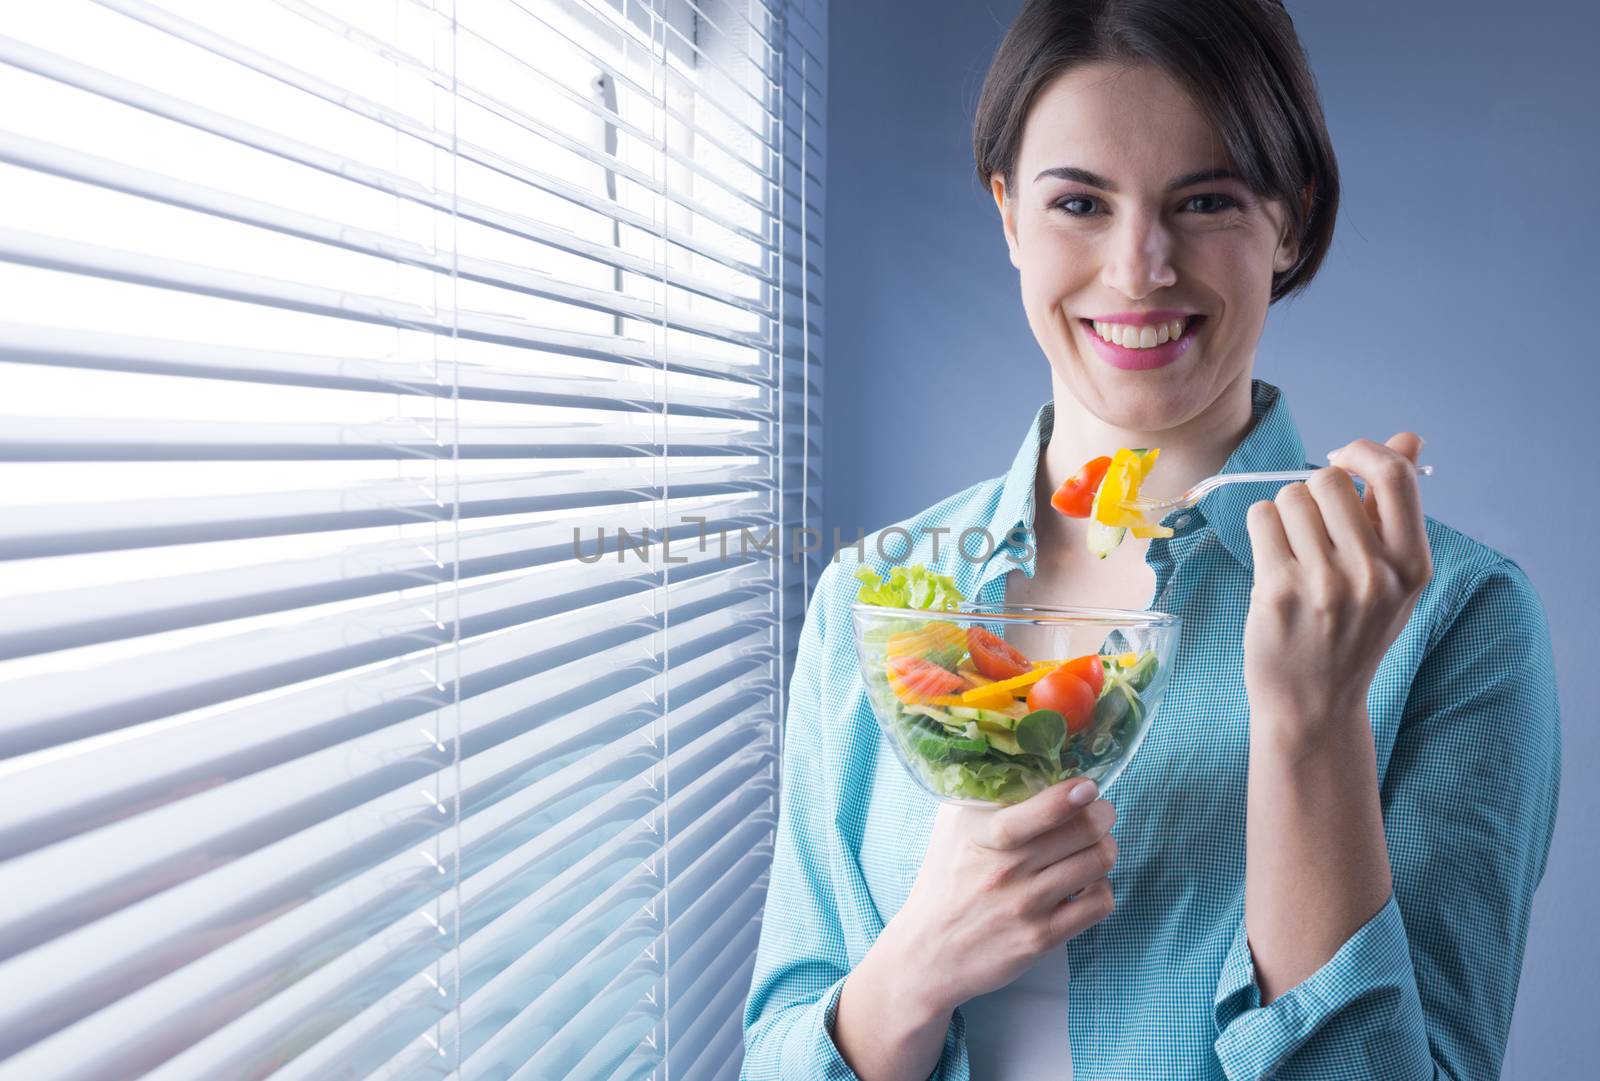 Woman smiling at camera and eating salad in front of a window.